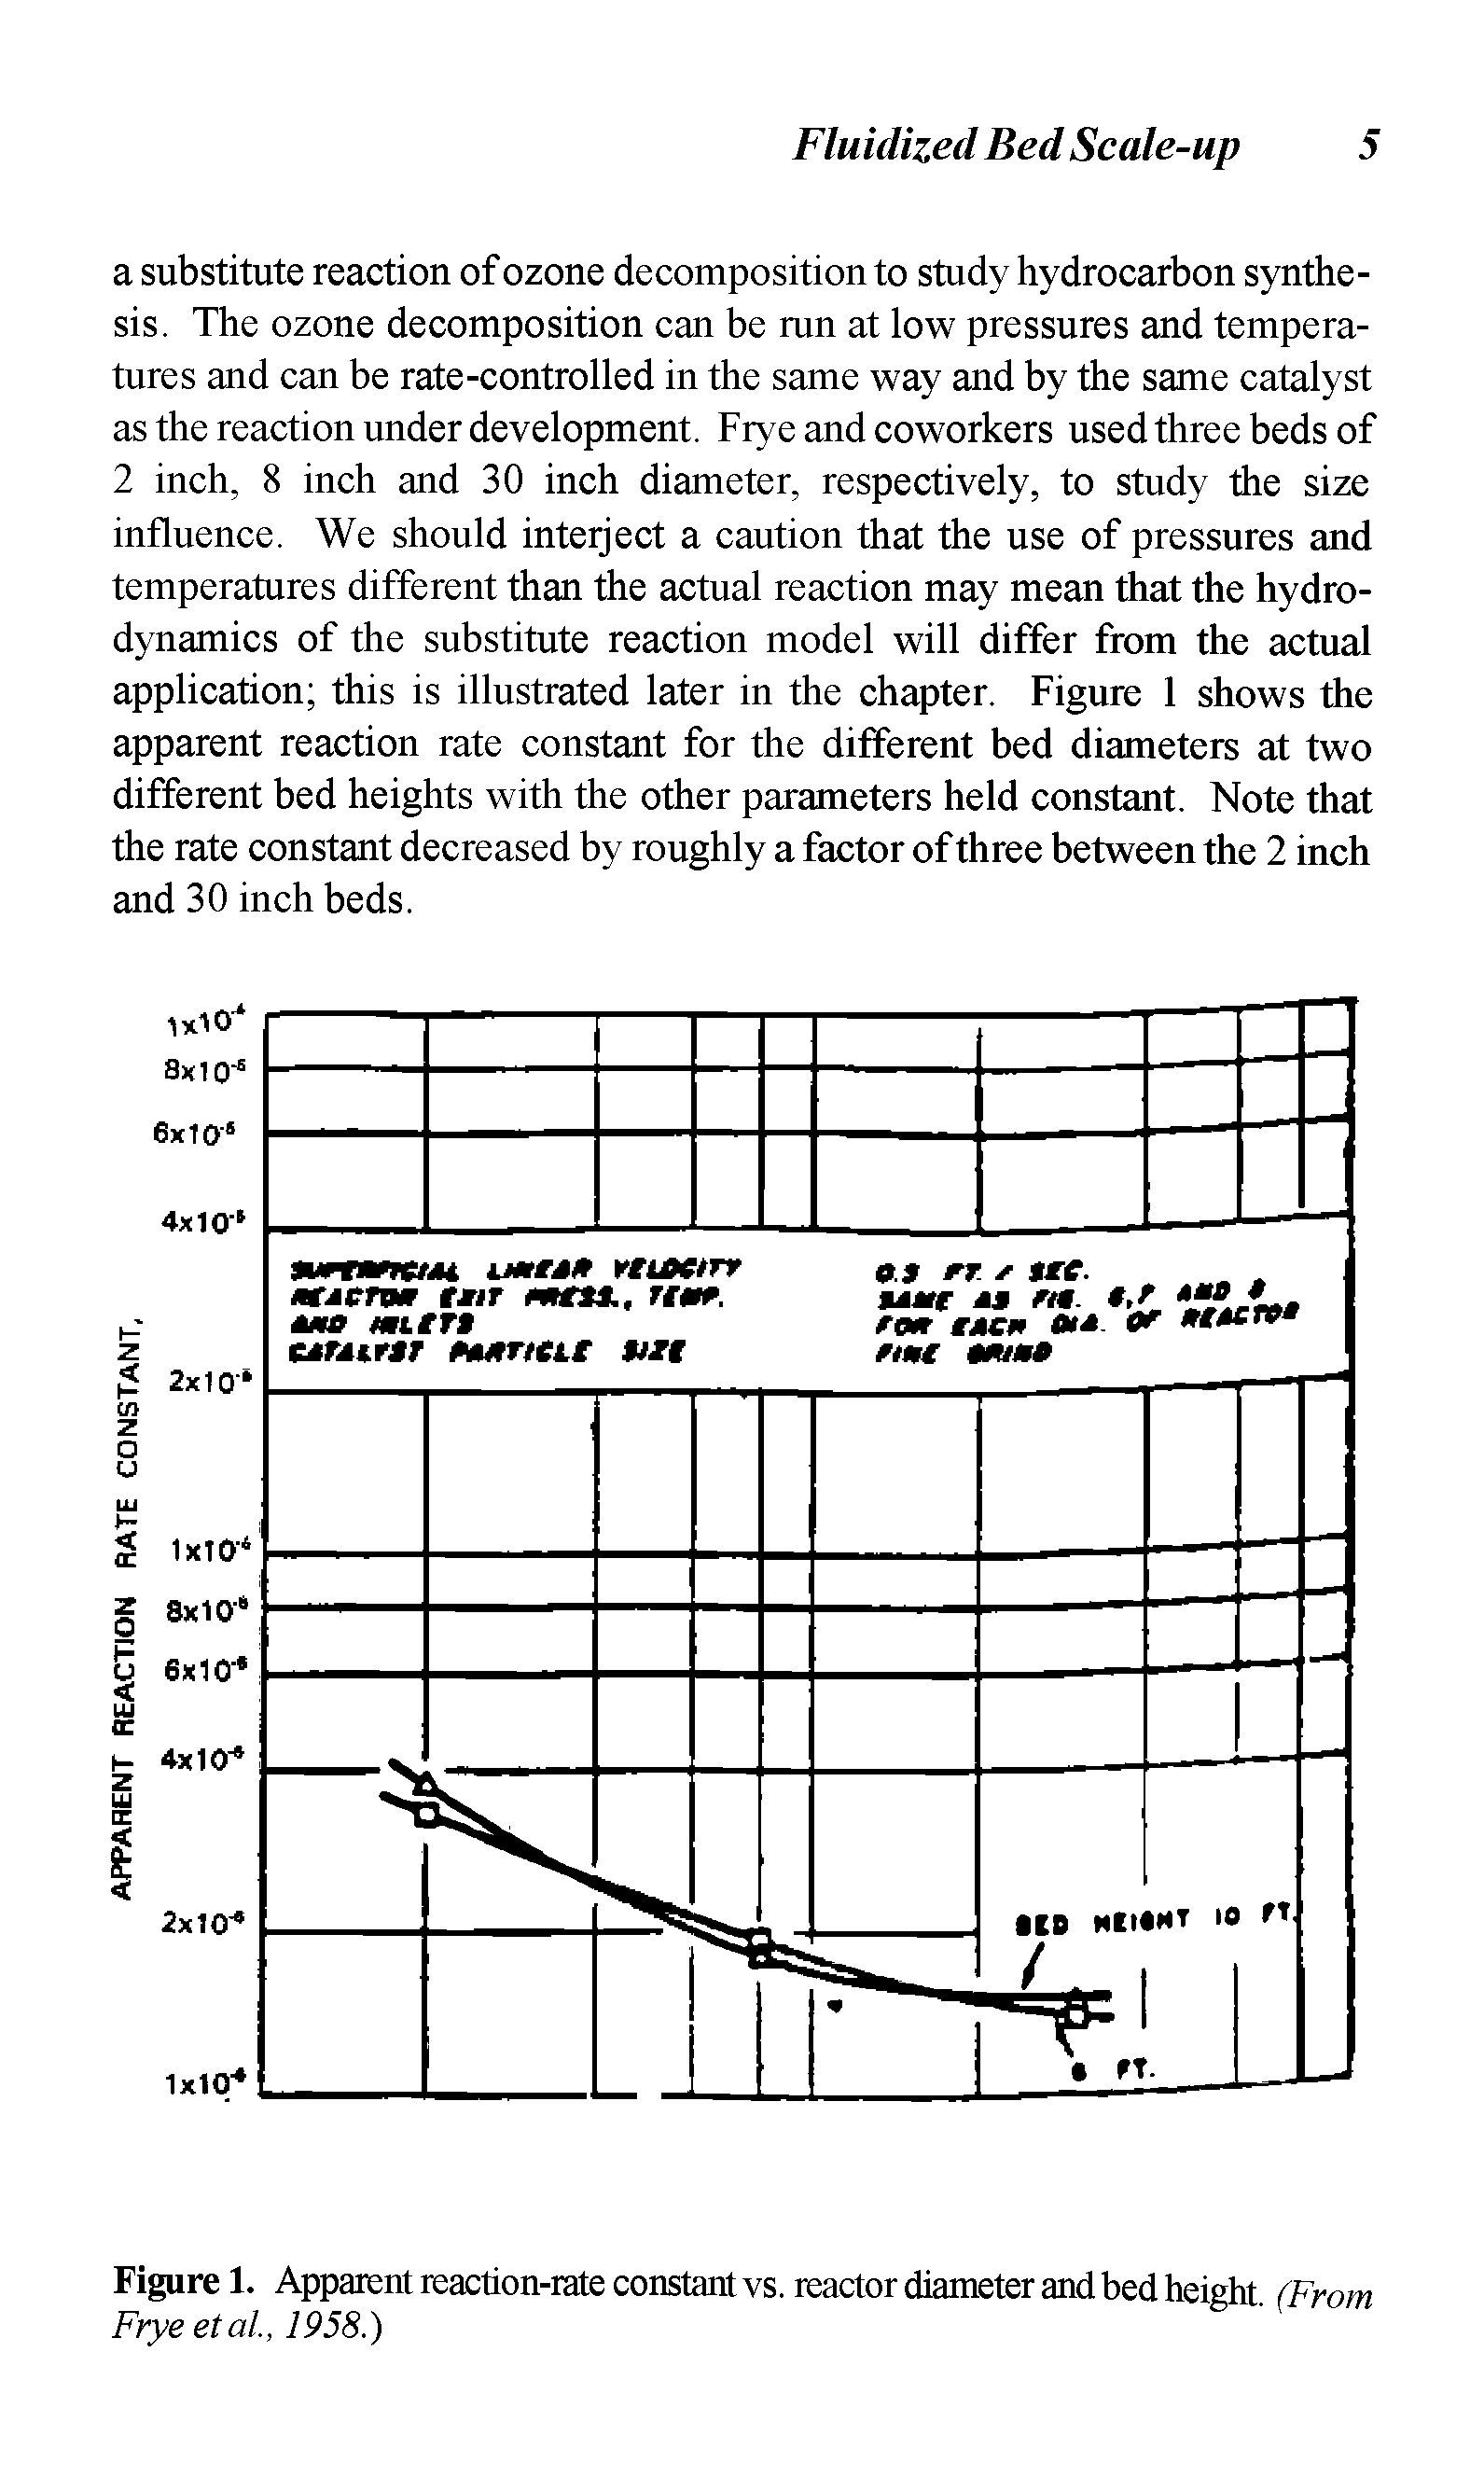 Figure 1. Apparent reaction-rate constant vs. reactor diameter and bed height. (From Frye etal., 1958.)...